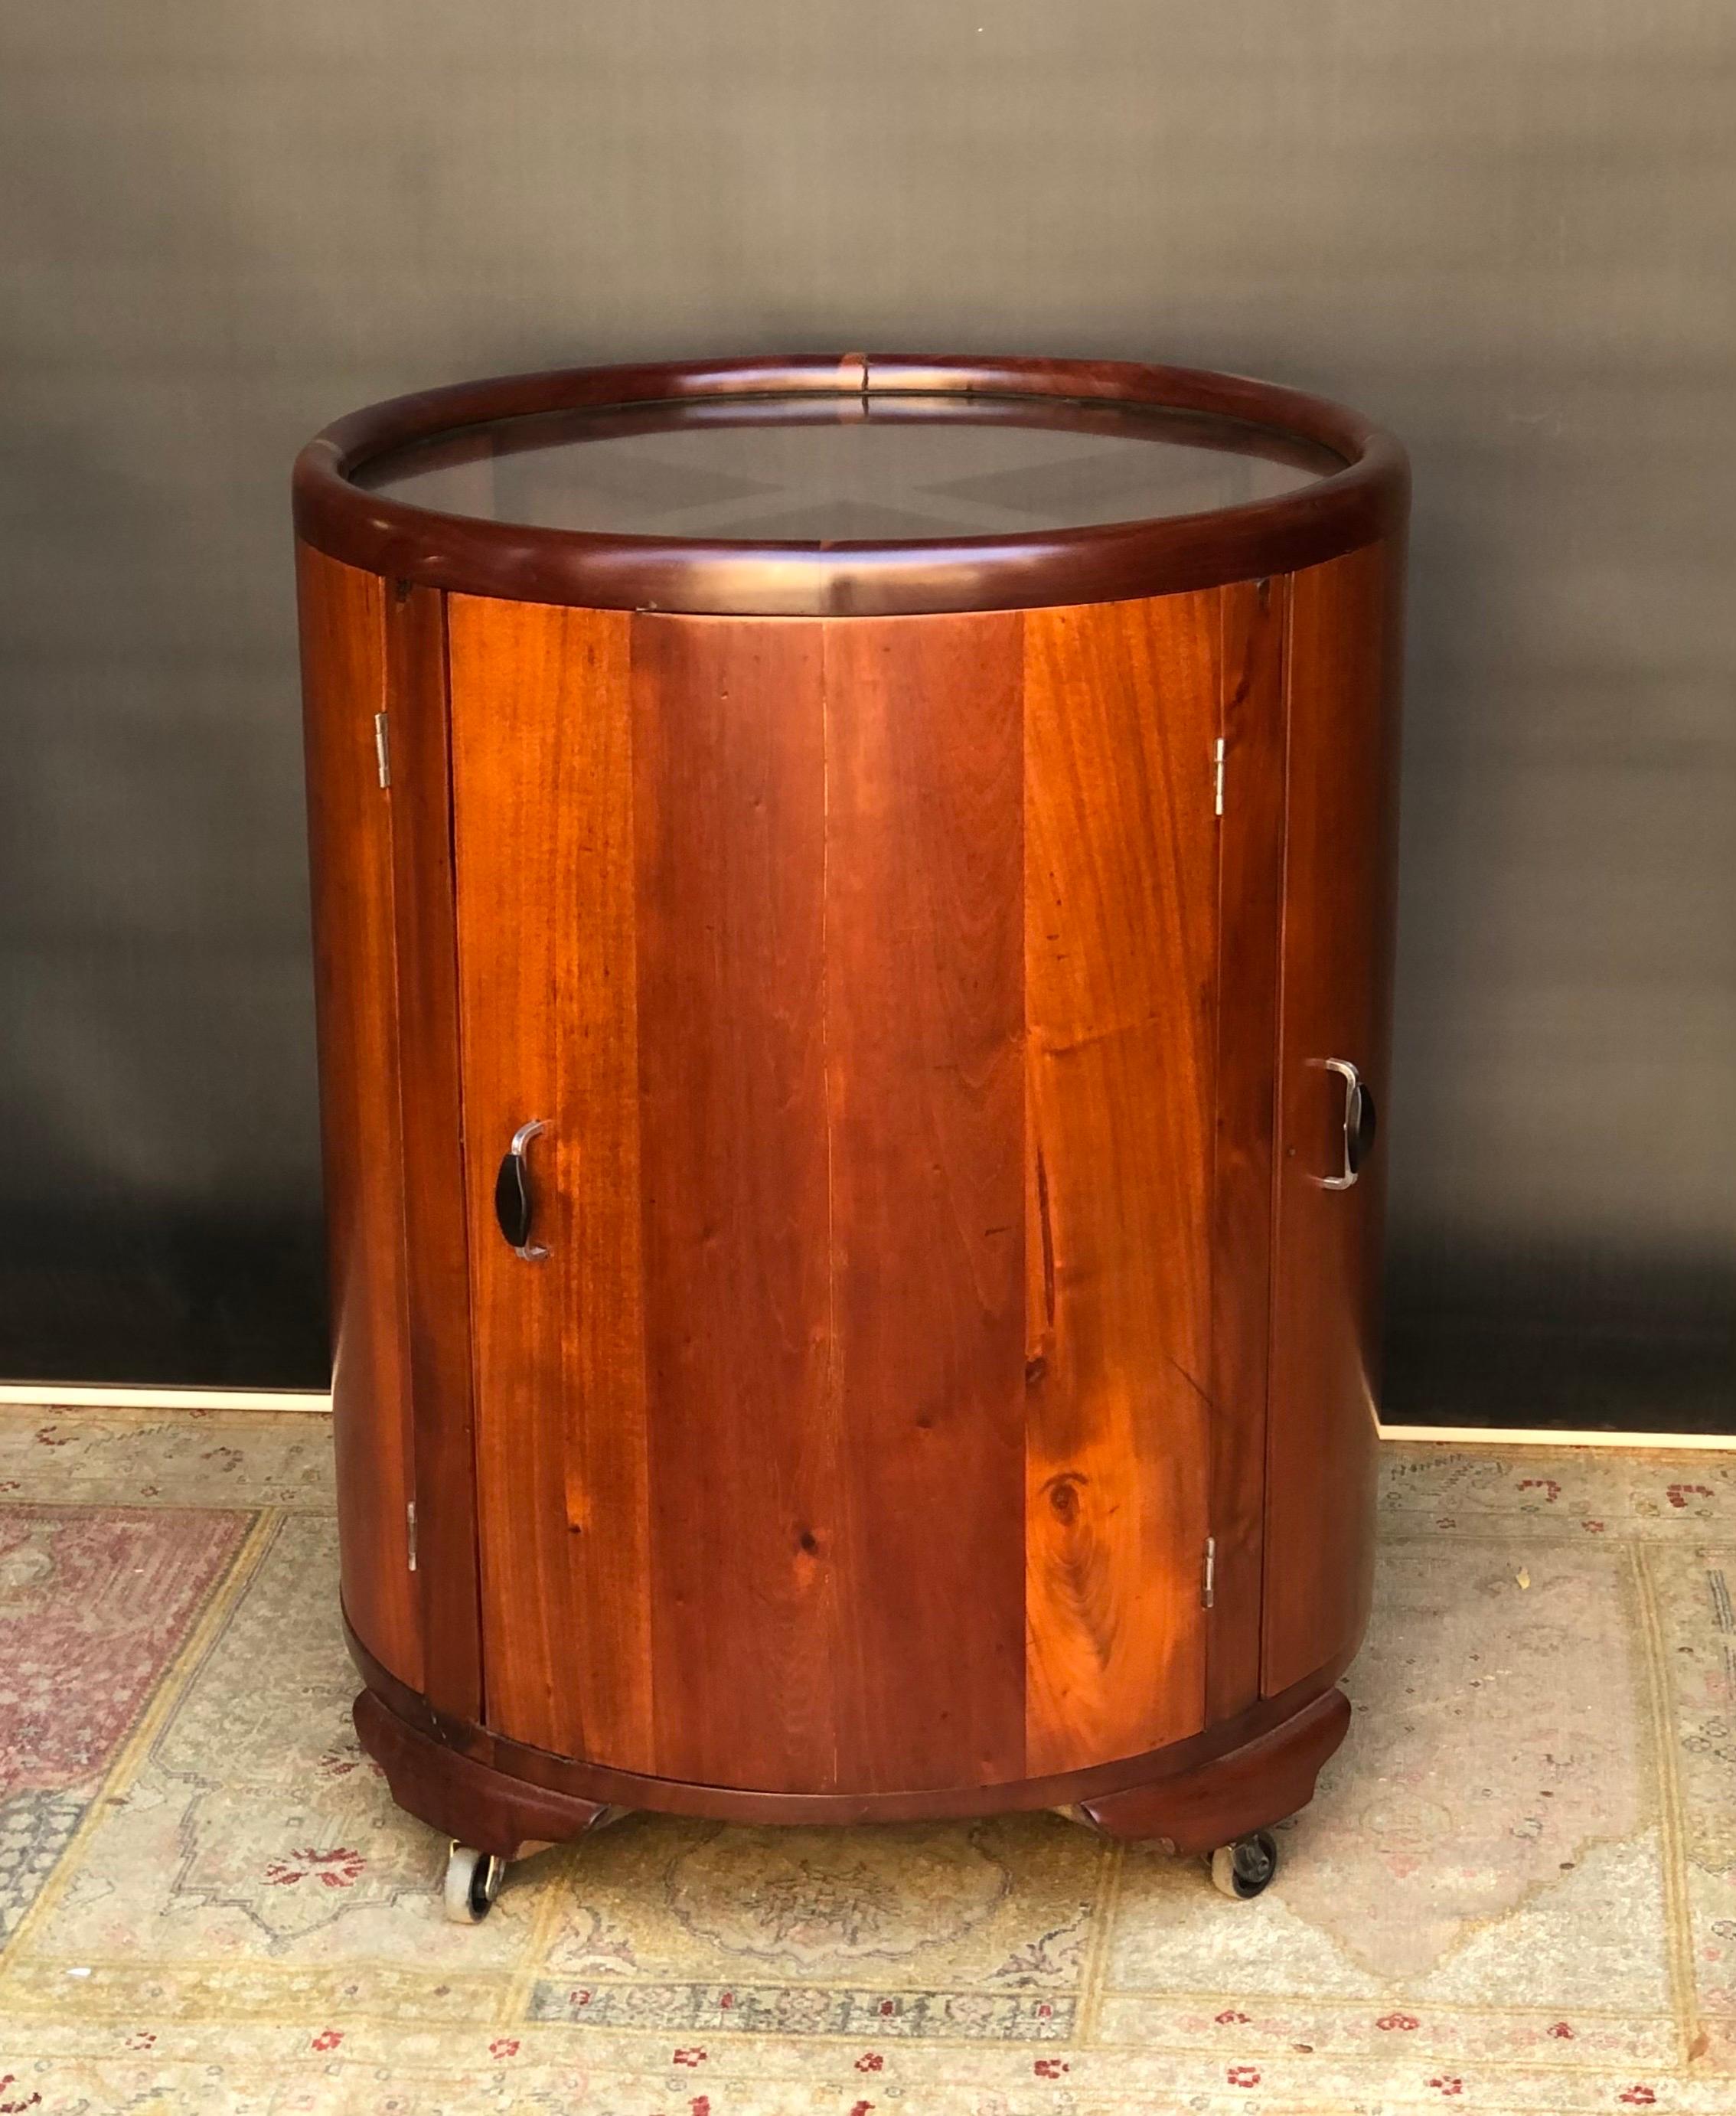 Jamaican Art Deco Round Bar/Cocktail Cabinet By Burnett Webster(circa.1934-1939) For Sale 10